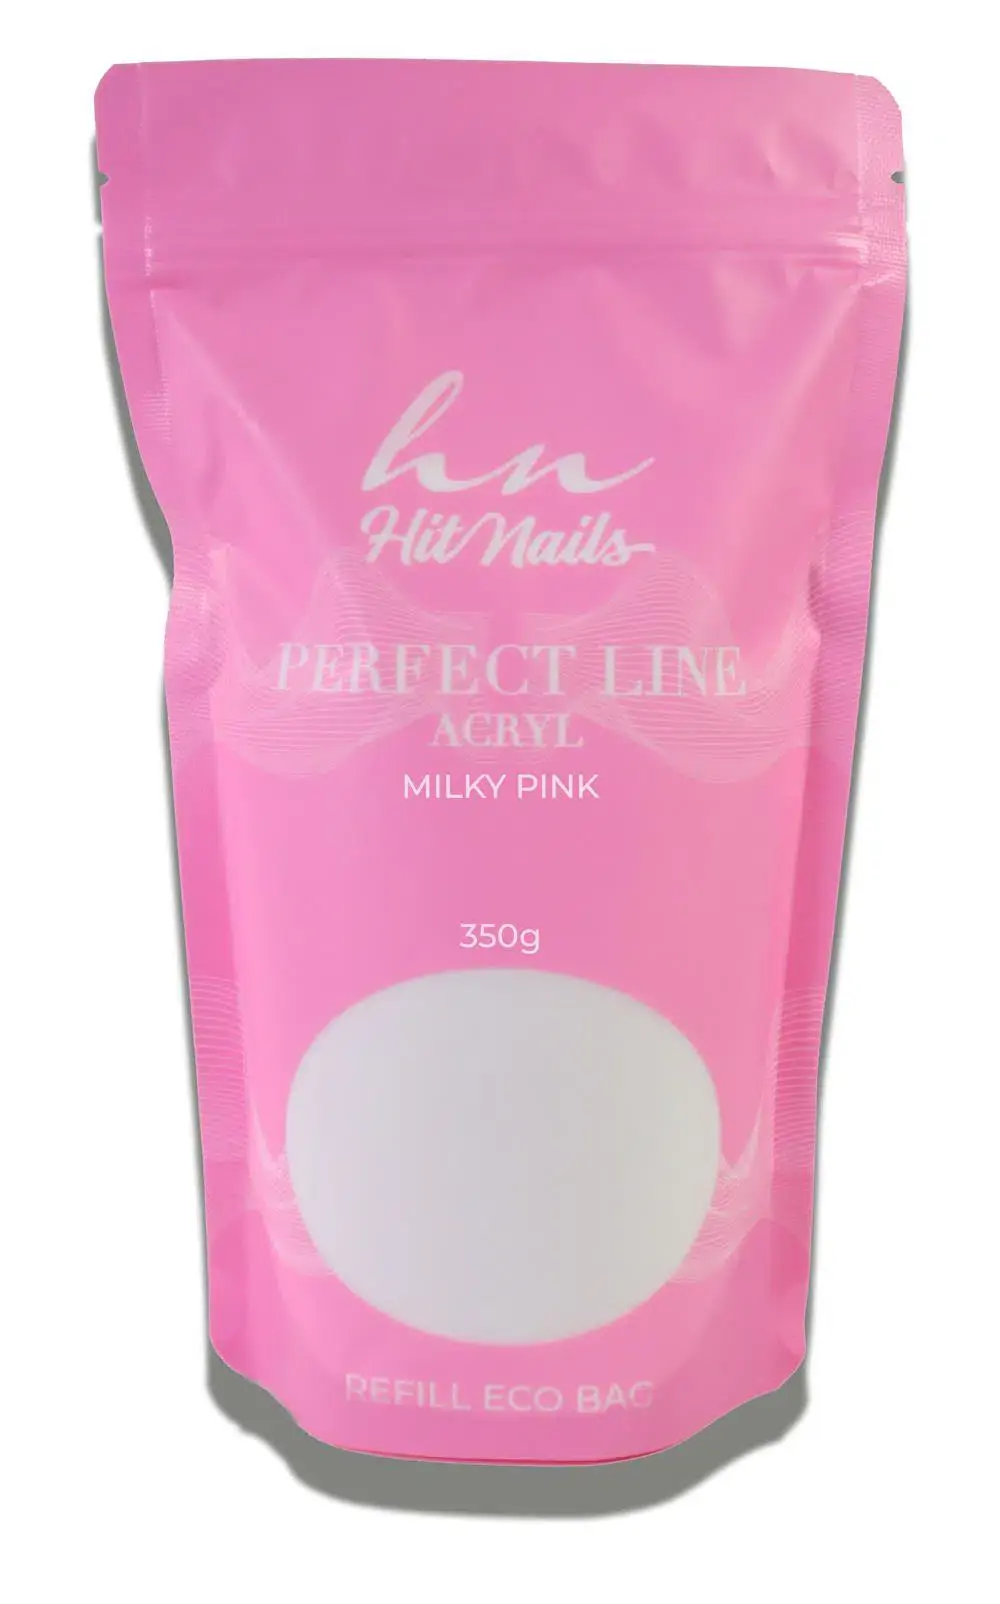 Perfect Line - Acryl - Milky Pink 350g Refill